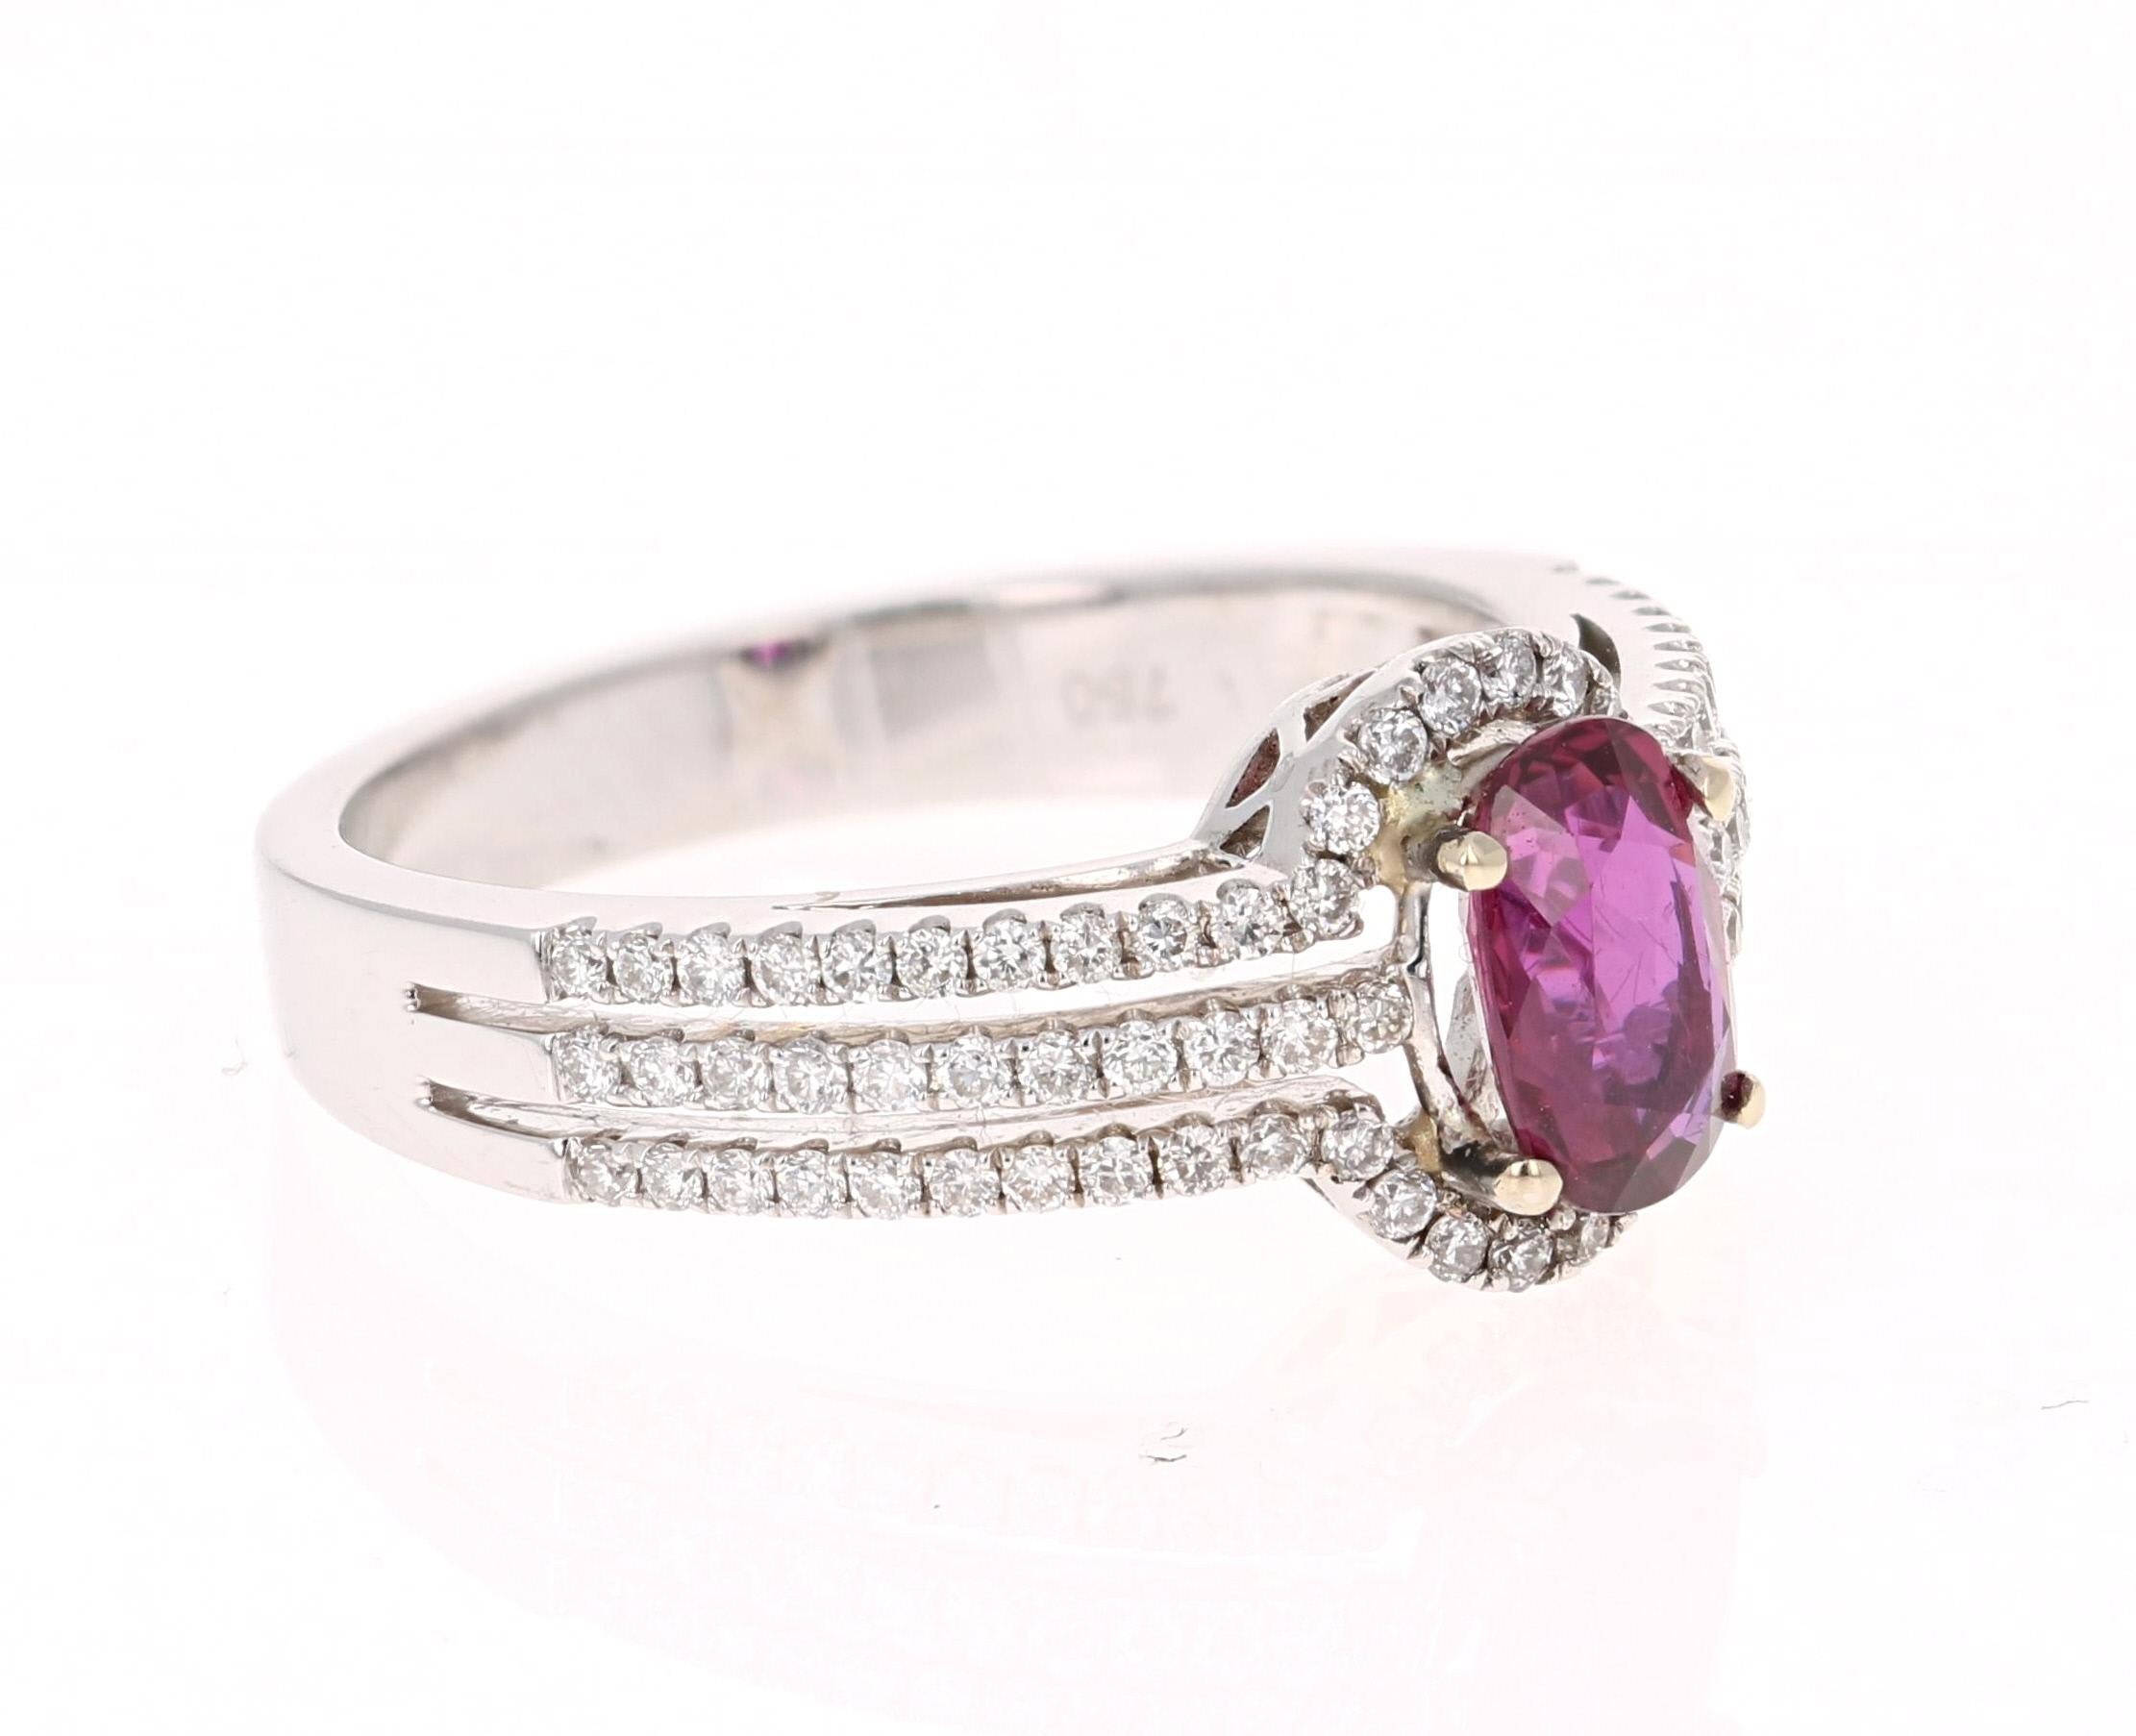 1.34 Carat Ruby and Diamond Ring in 14K White Gold

This ring has a beautiful Oval Cut Ruby that weighs 0.93 carats and is surrounded by 78 Round Cut Diamonds that weigh 0.41 carats. The total carat weight of the ring is 1.34 carats.

The ring is